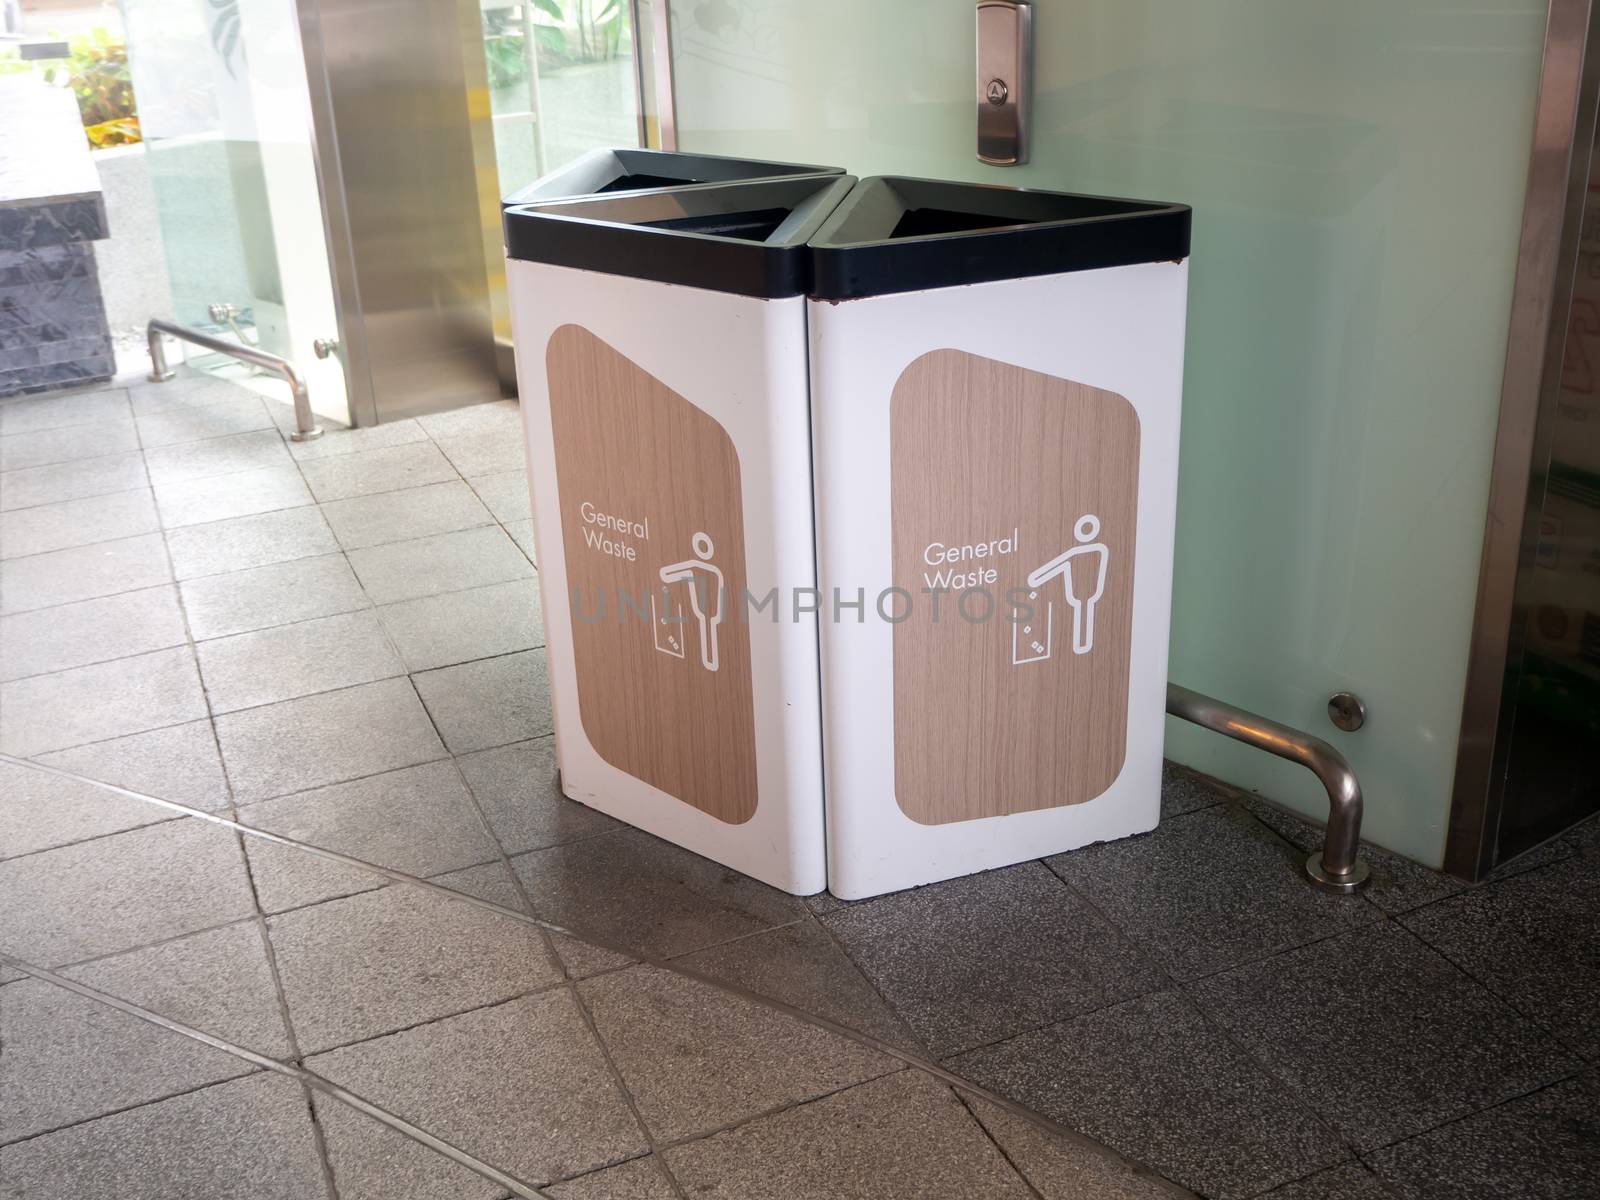 recycling bin at shopping mall, trash container with icons of recycle